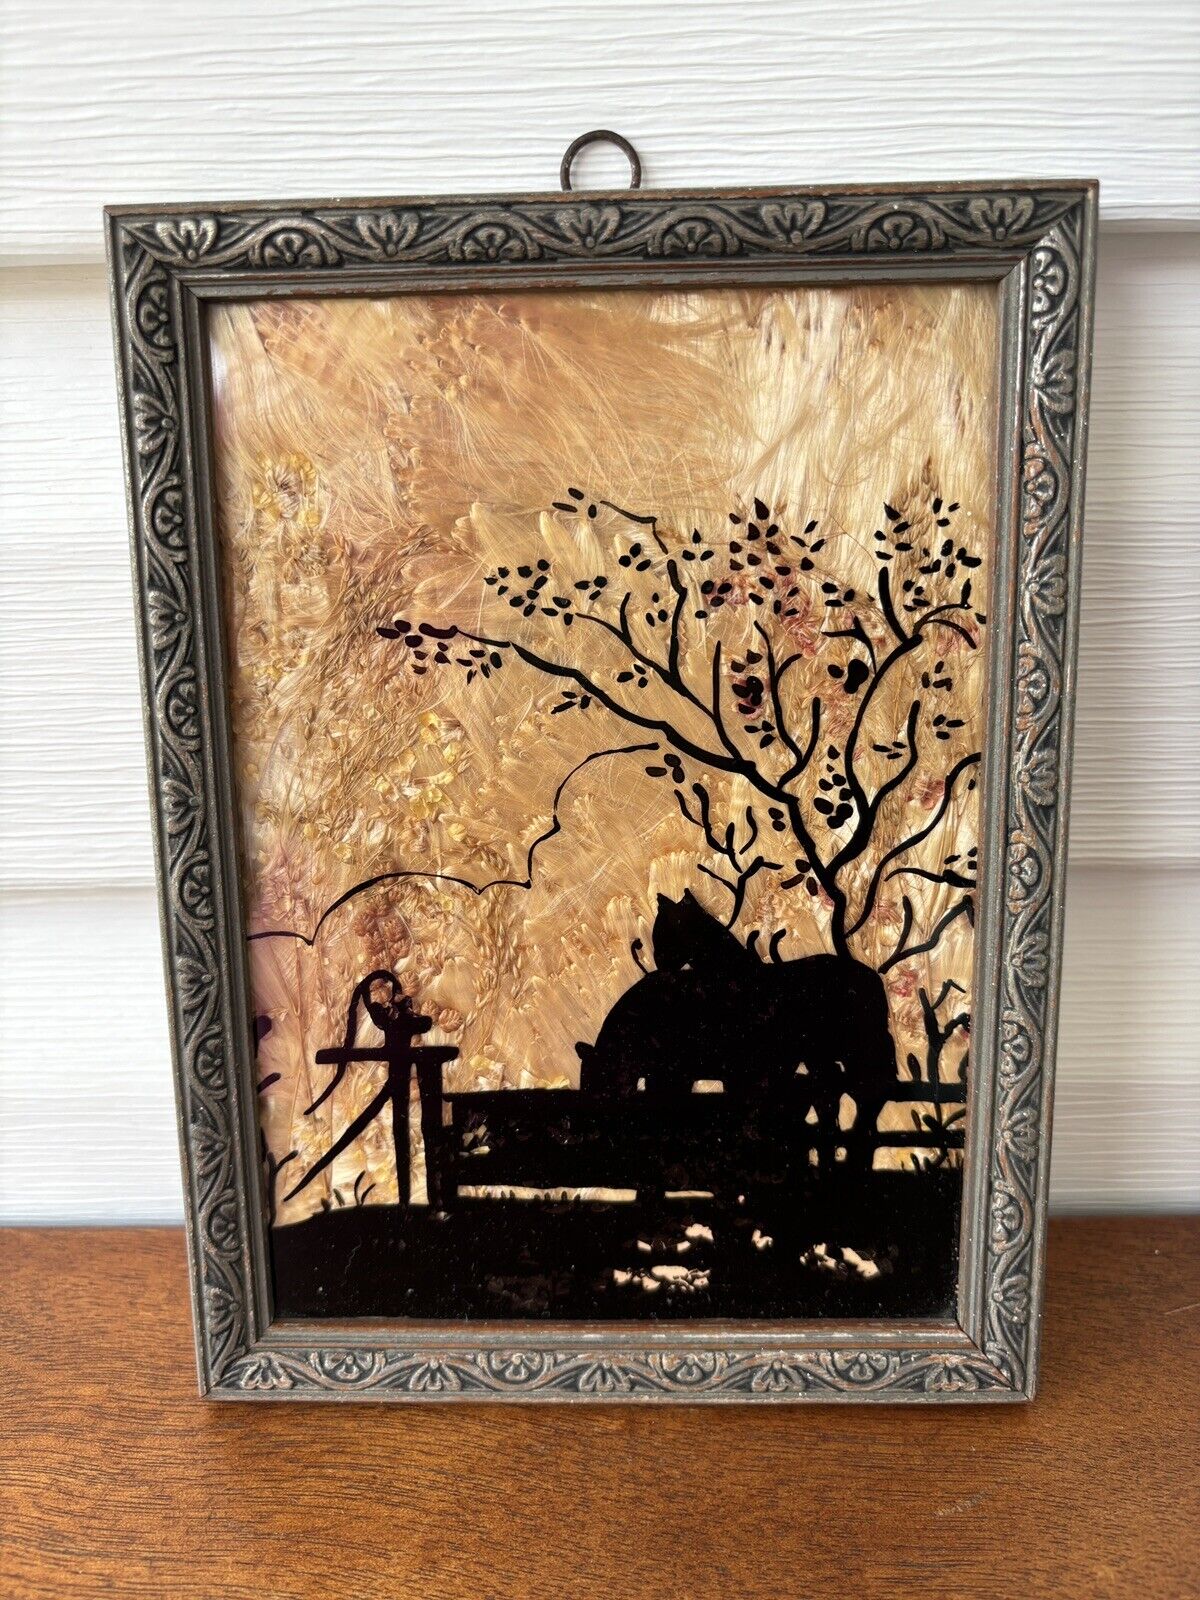 Framed Reverse Painted Horses Silhouette w/ Feathers, Dried Flowers Antique